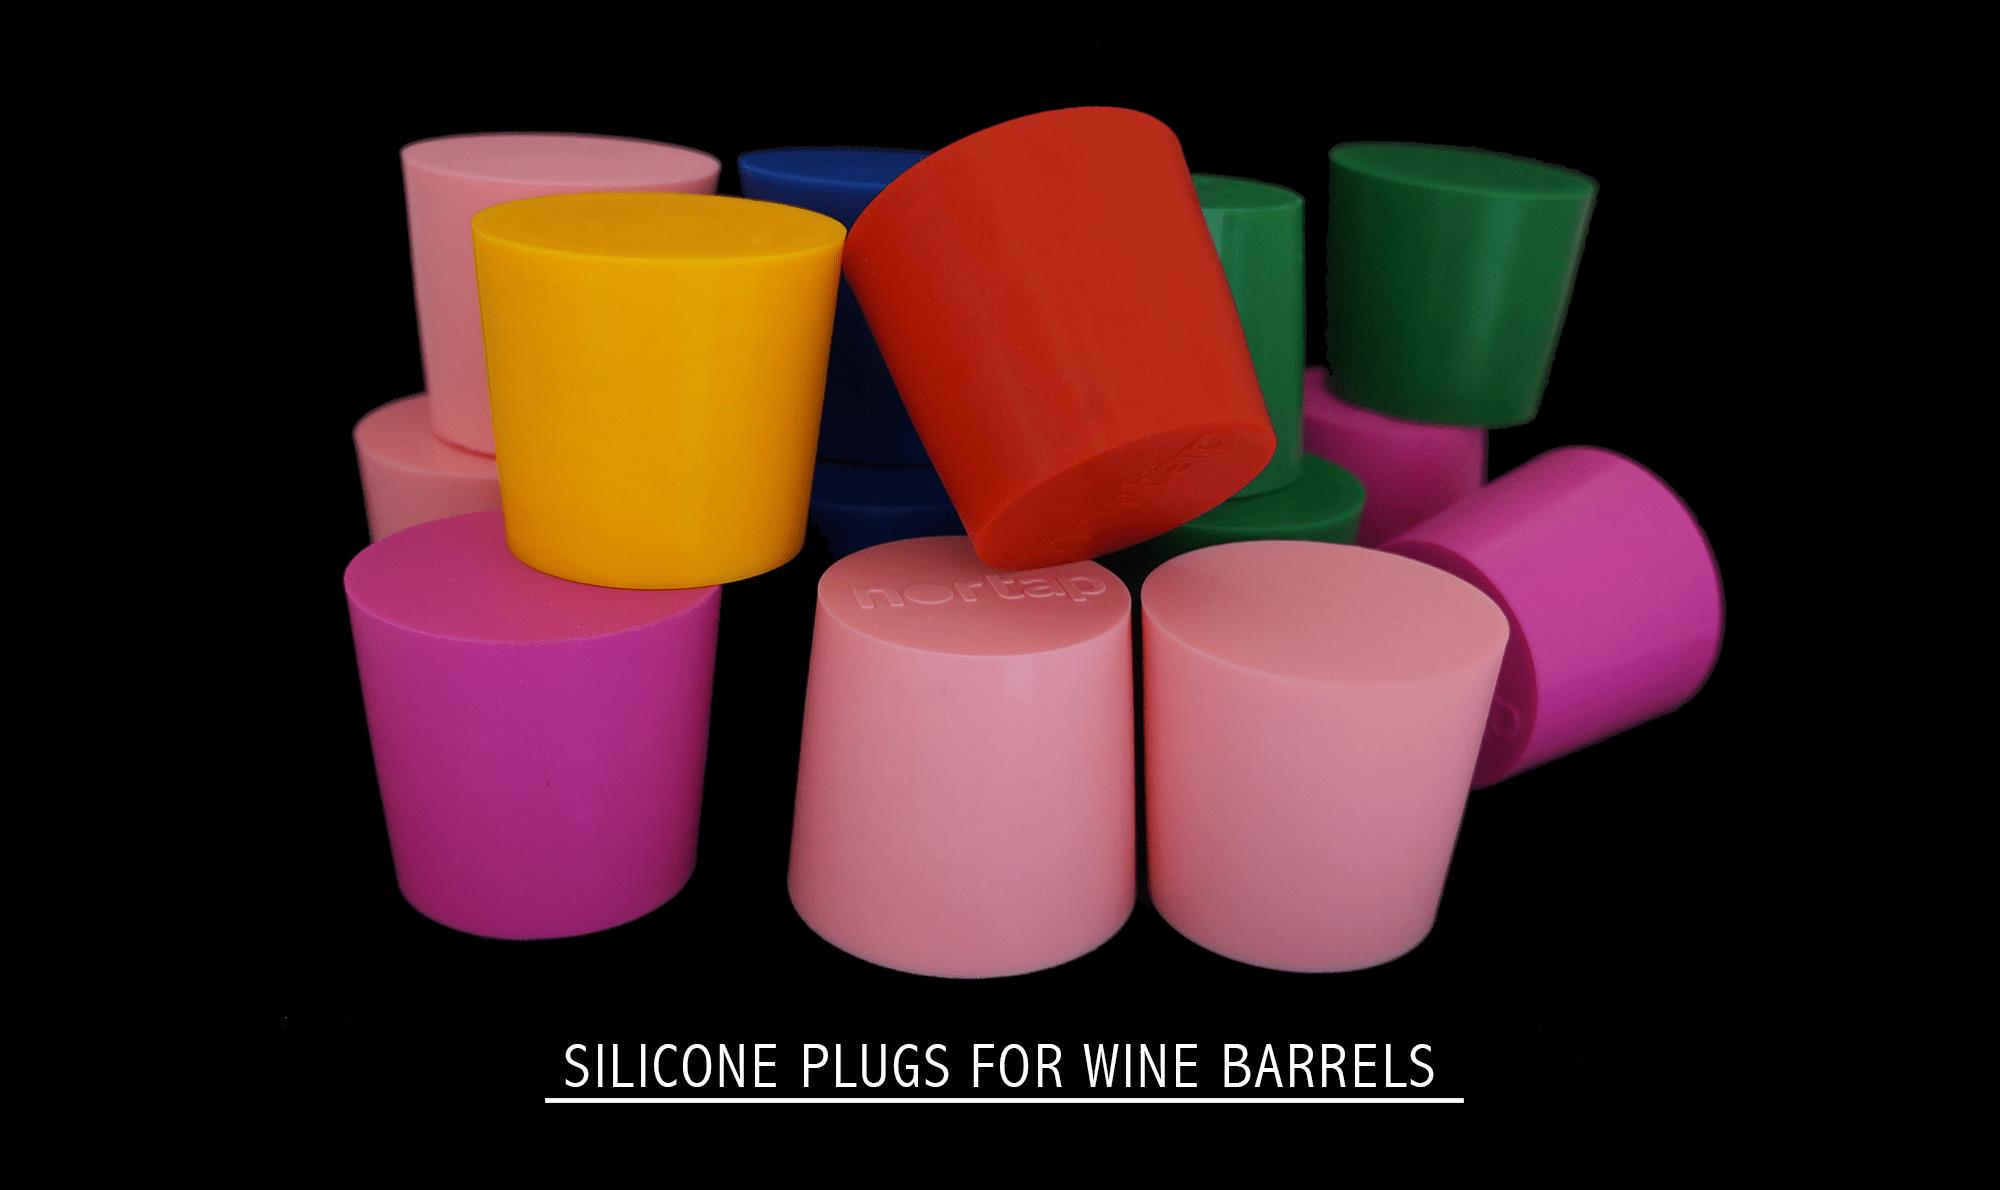 Food-grade silicone plugs for quality wines | News | JIOrings